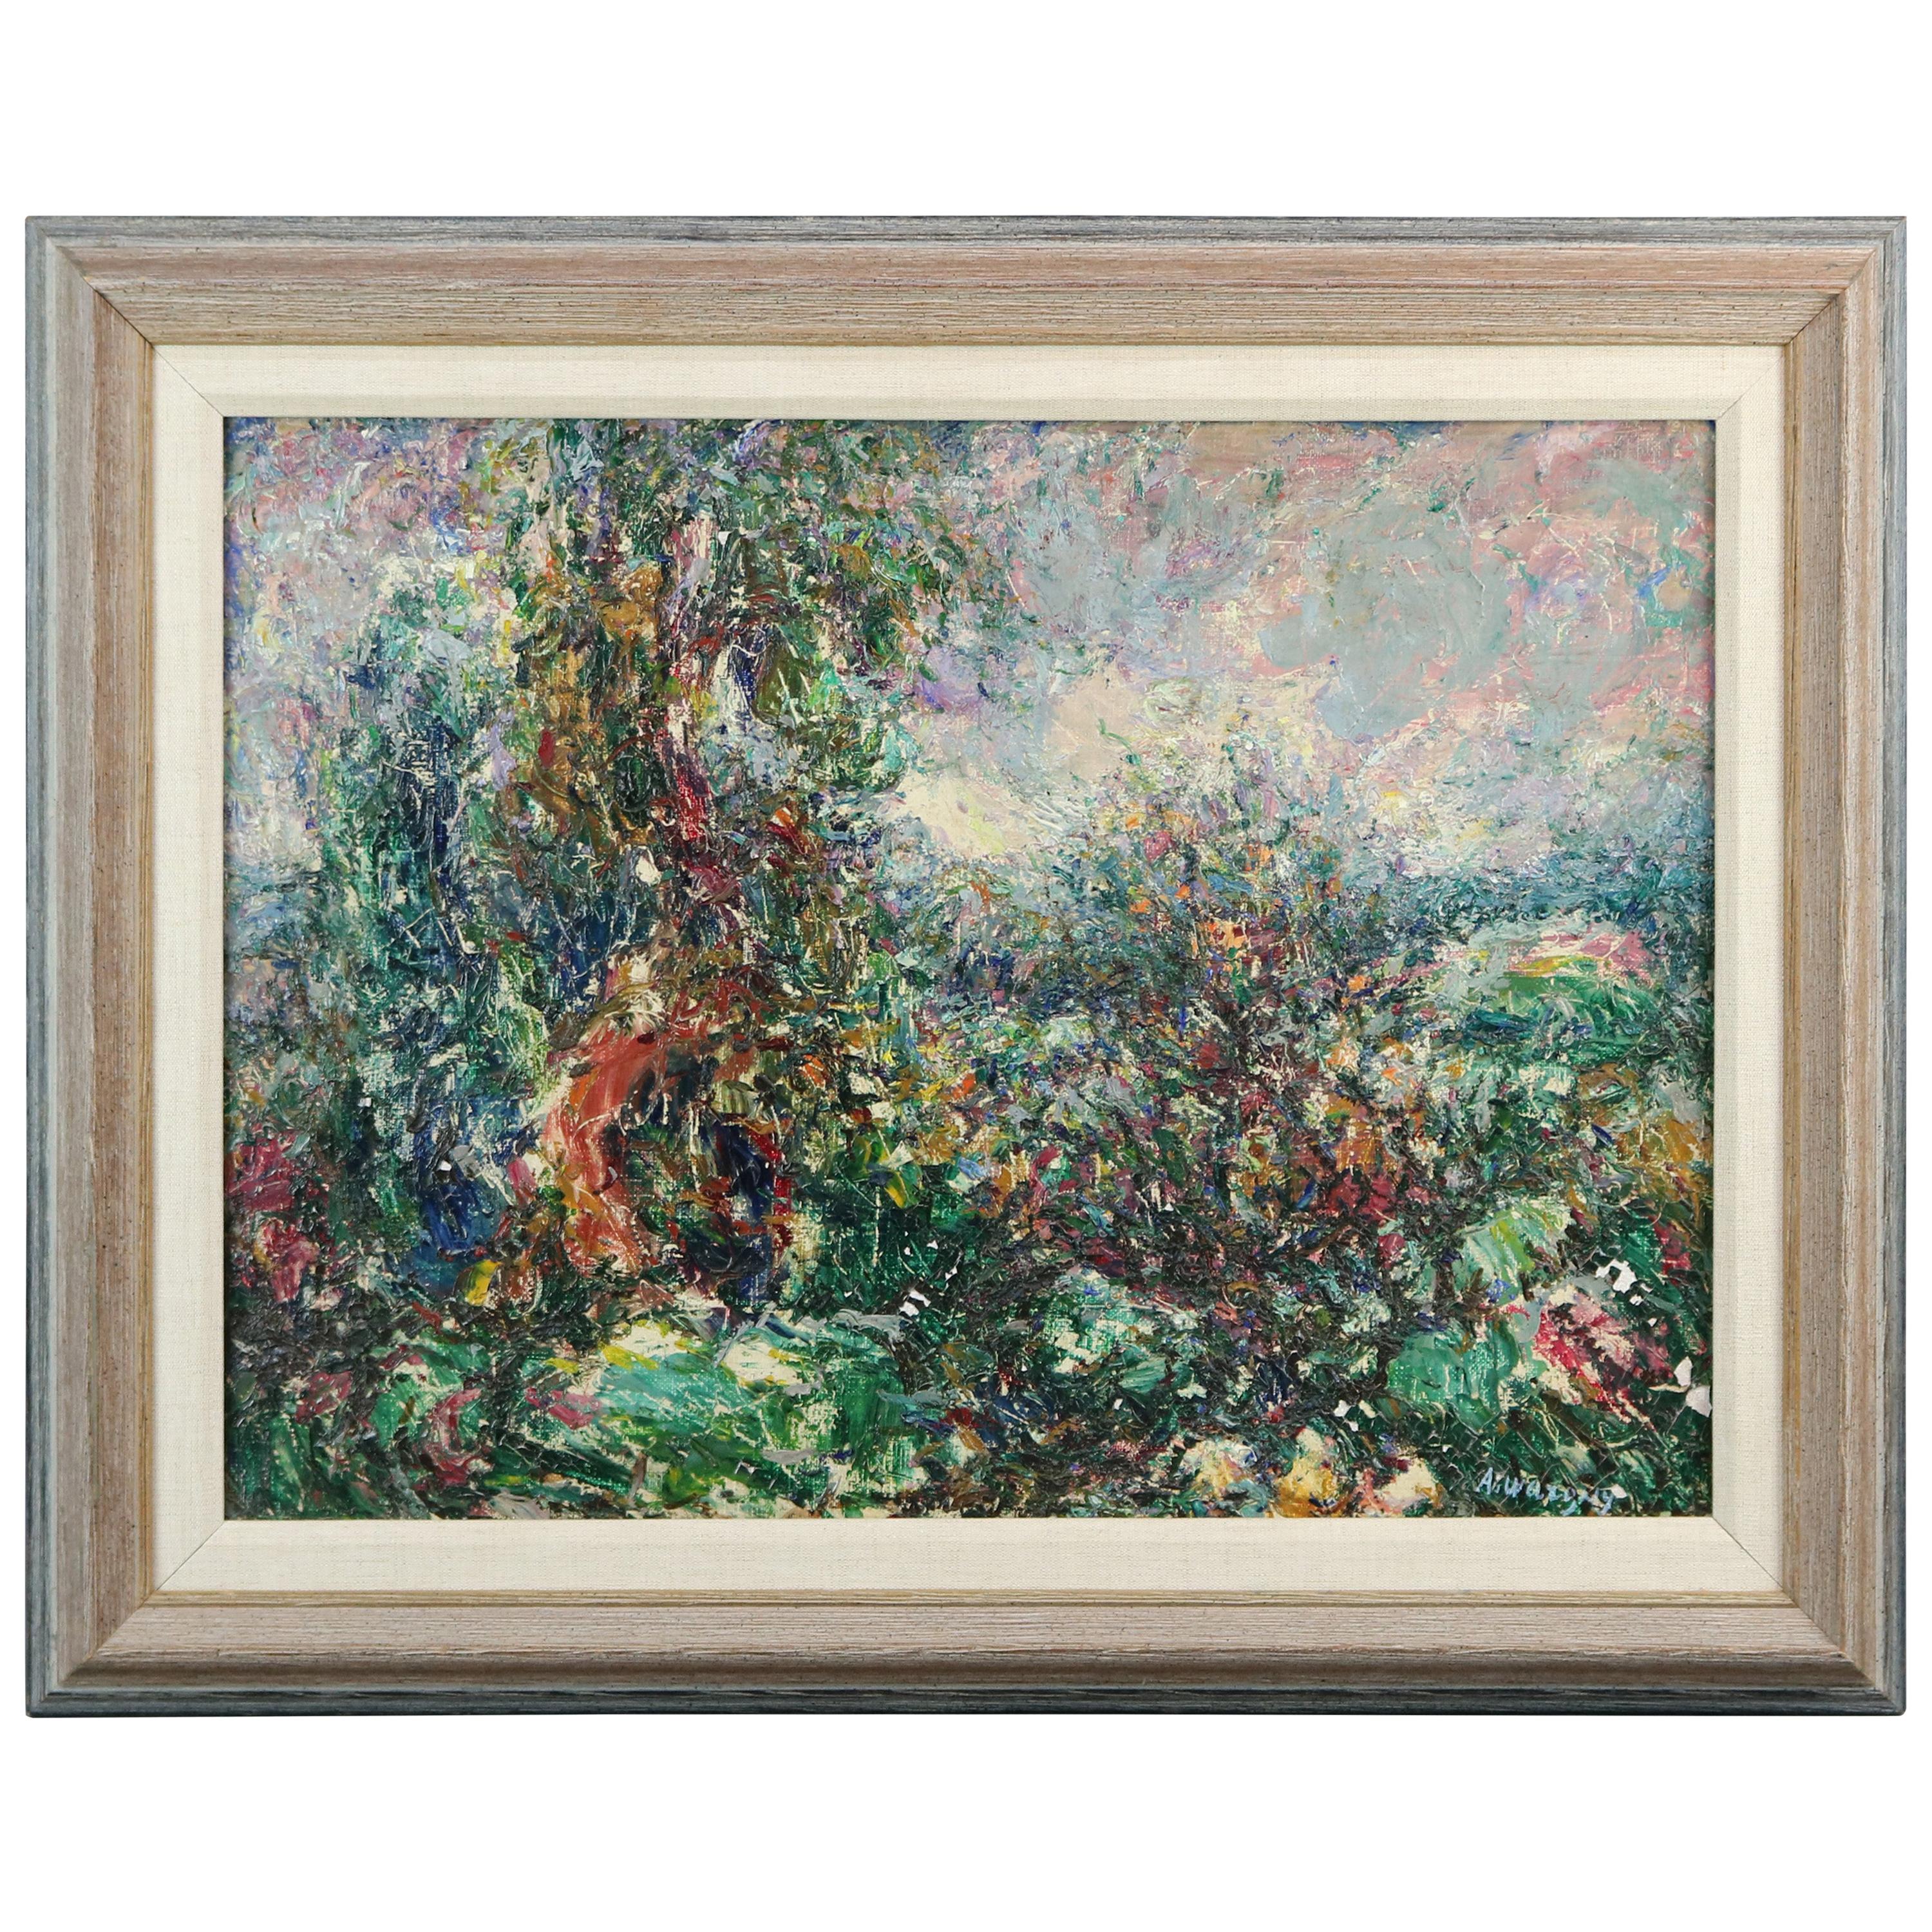 Abstract Impressionistic Painting, Thanksgiving Time by Armand Wargny circa 1940